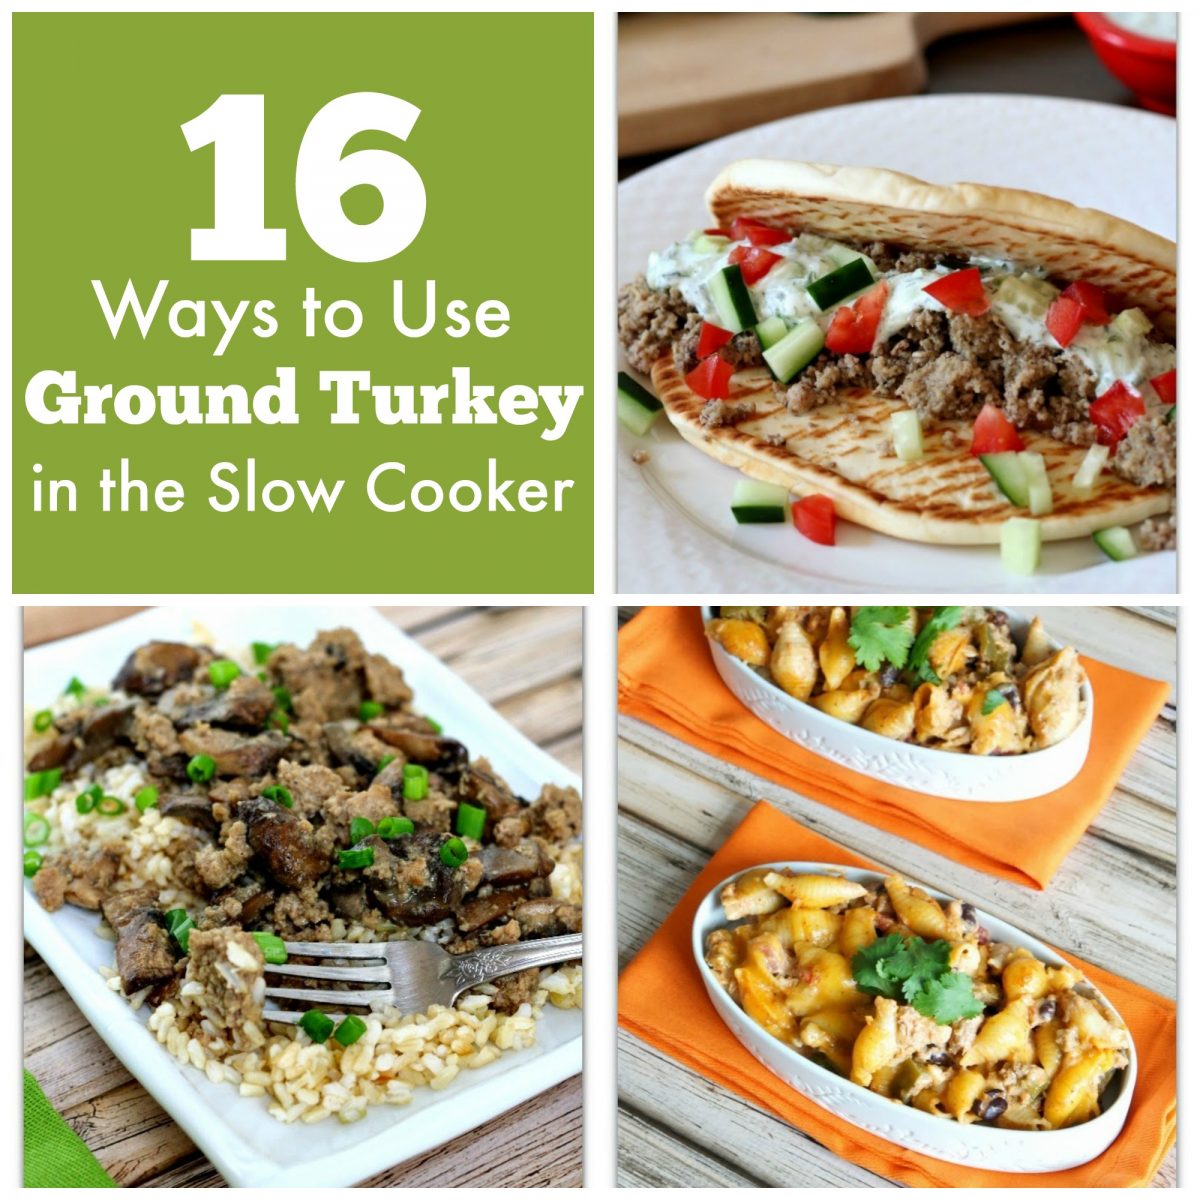 16 recipes and ideas of ways to use ground turkey in the crockpot